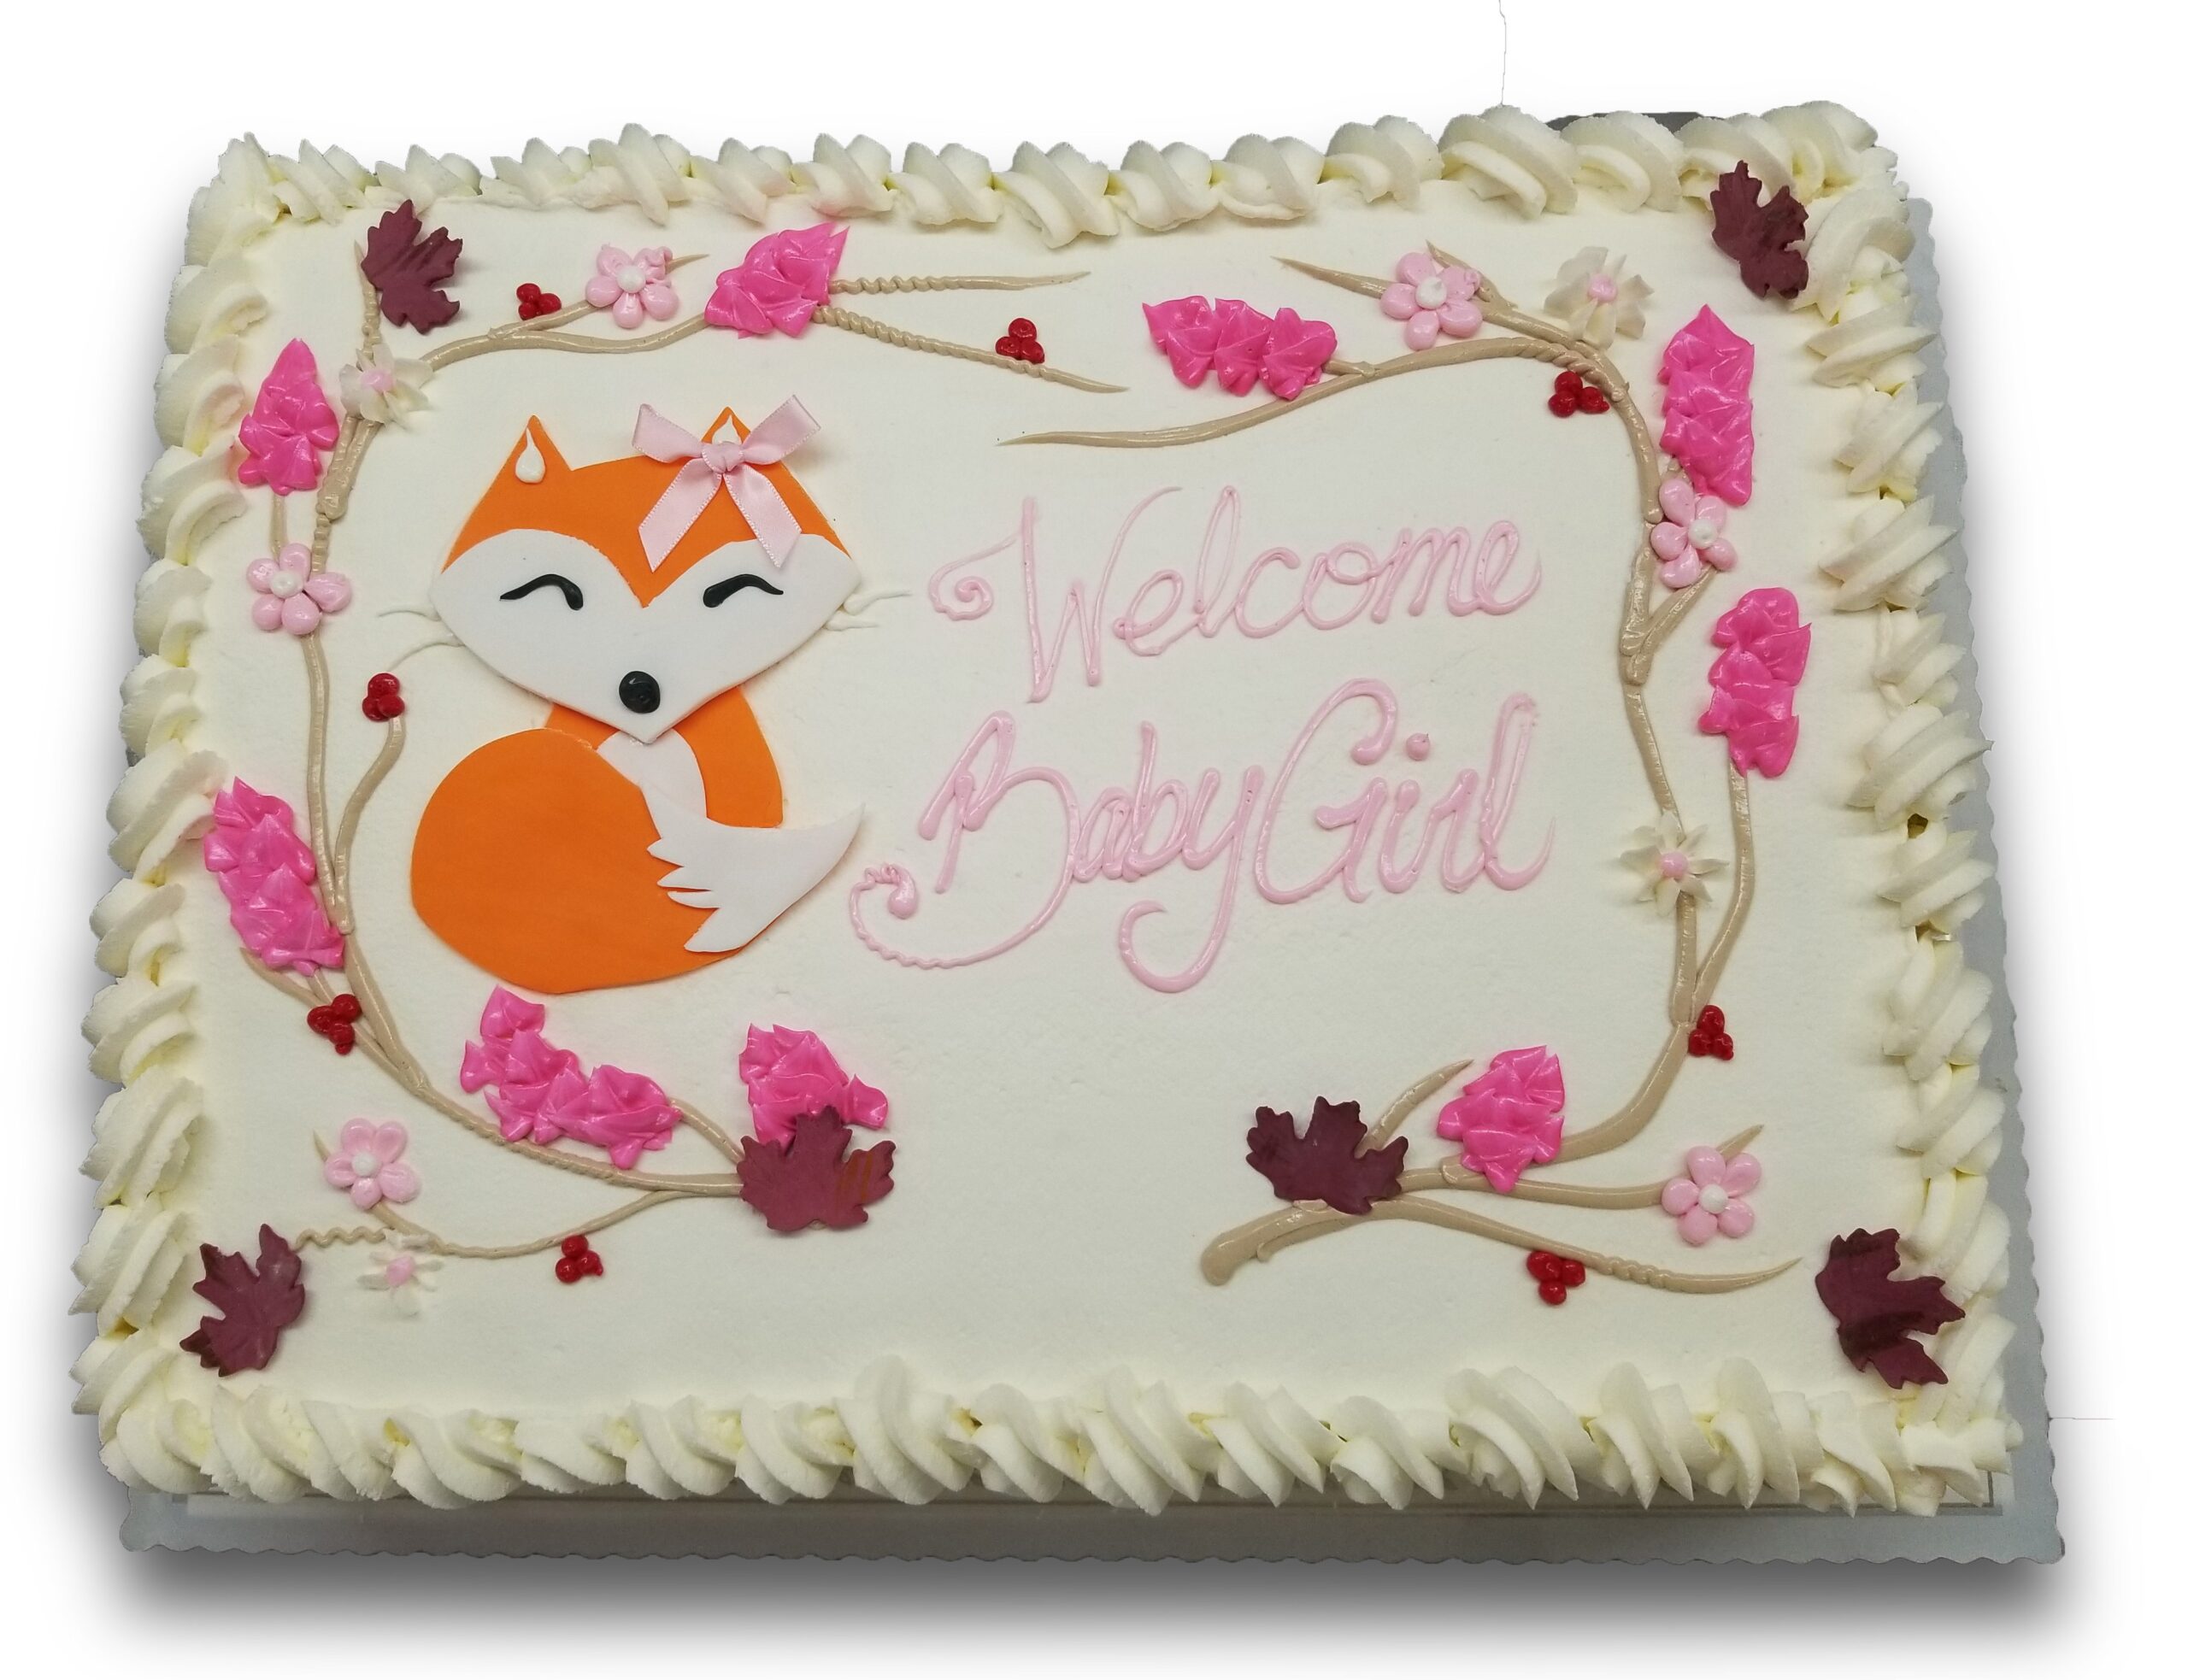 BS09. Fondant fox with buttercream leaves and branches on a whipped cream cake